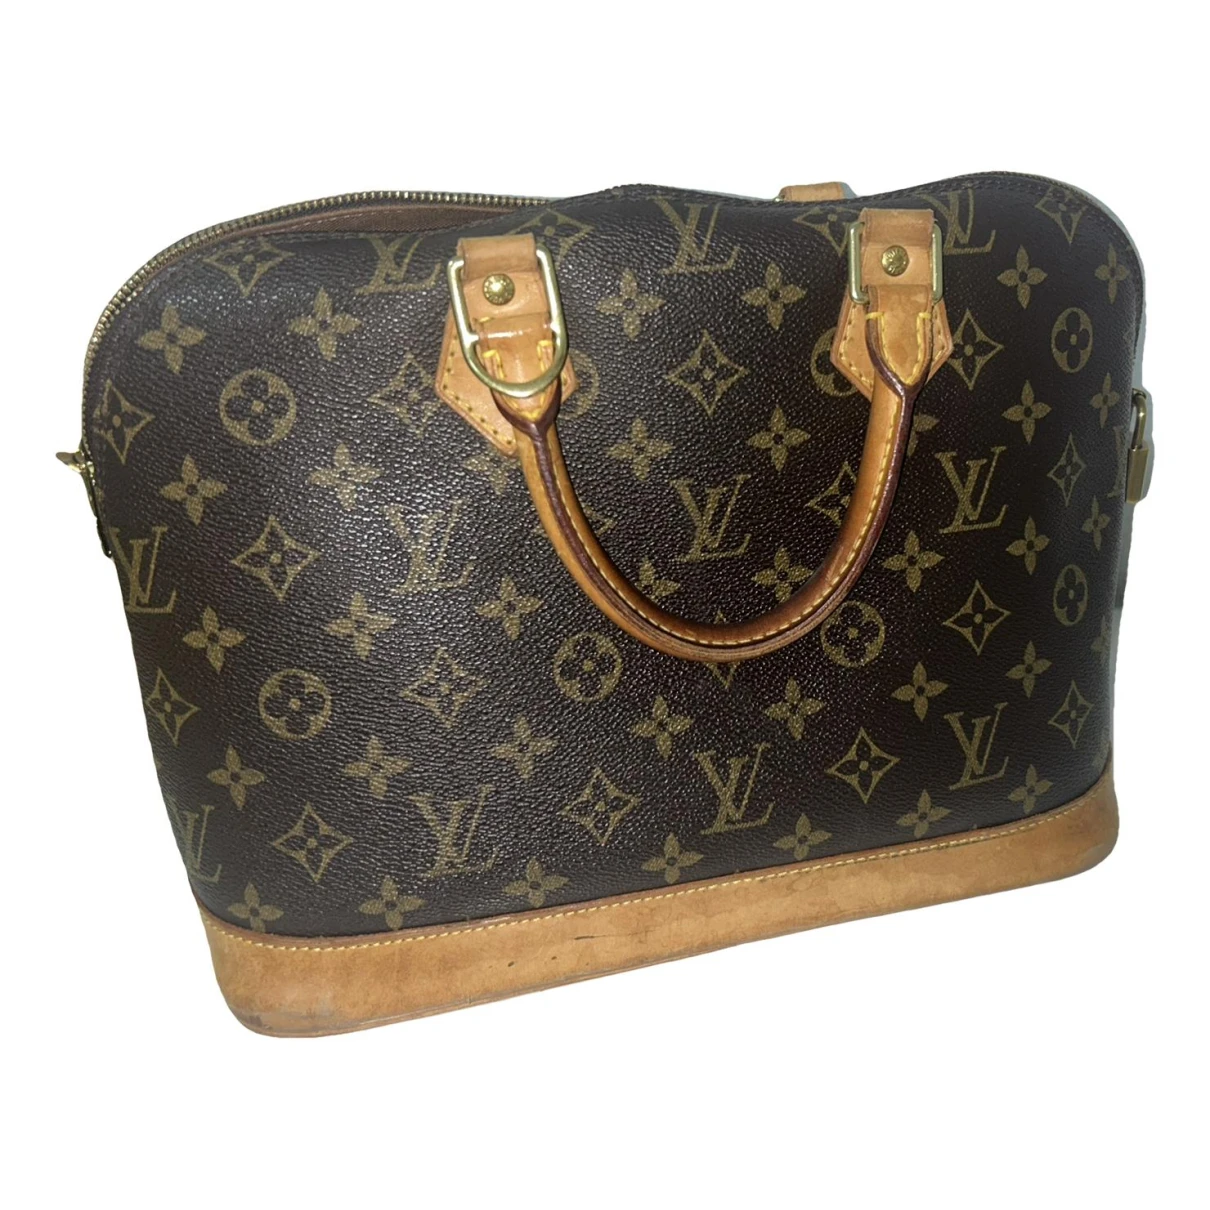 Pre-owned Louis Vuitton Alma Leather Handbag In Brown